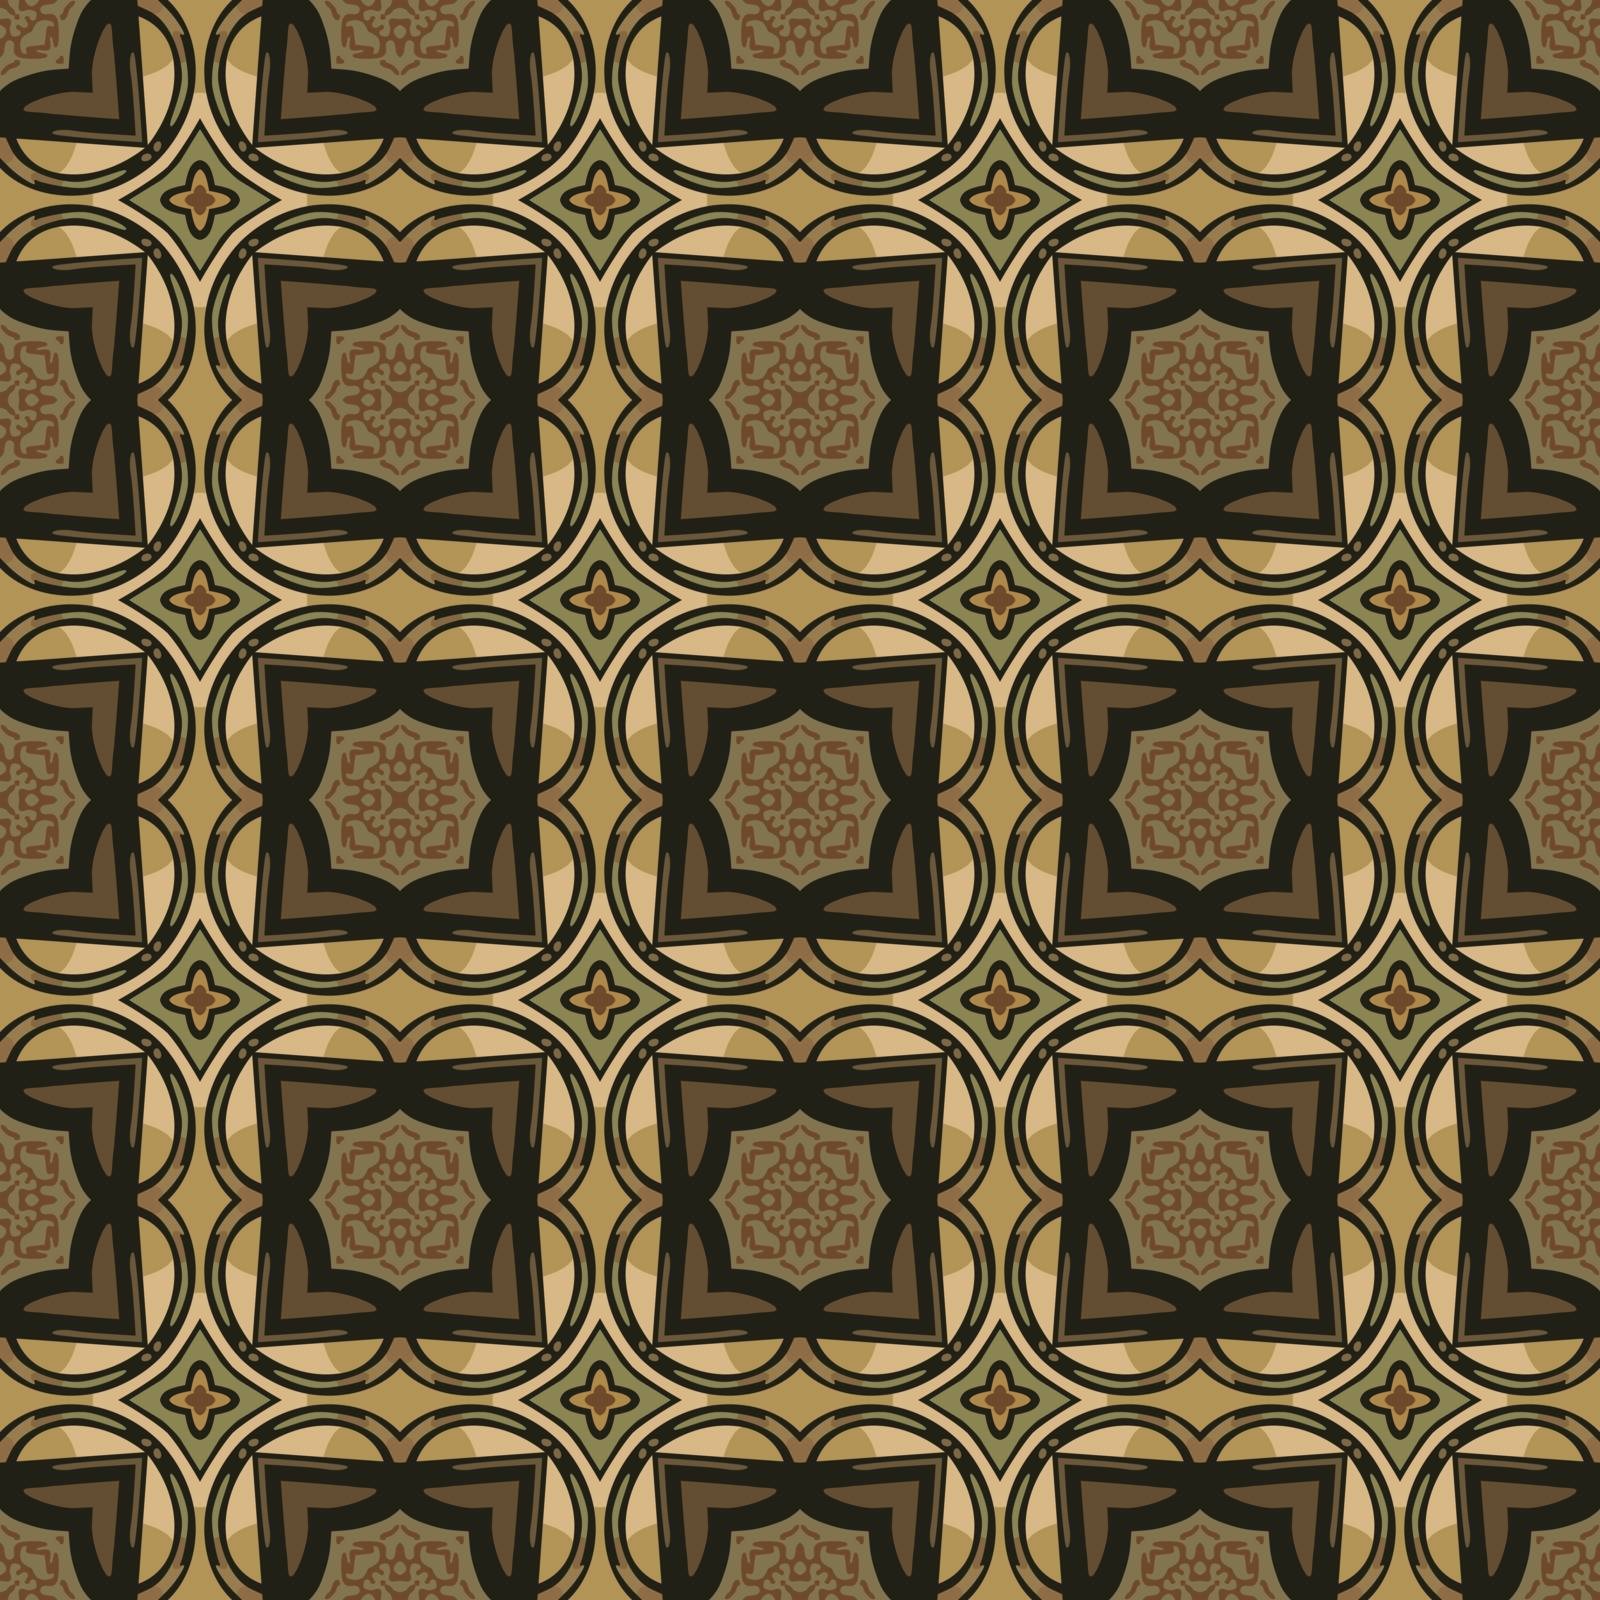 Seamless illustrated pattern made of abstract elements in beige, turquoise, brown and black